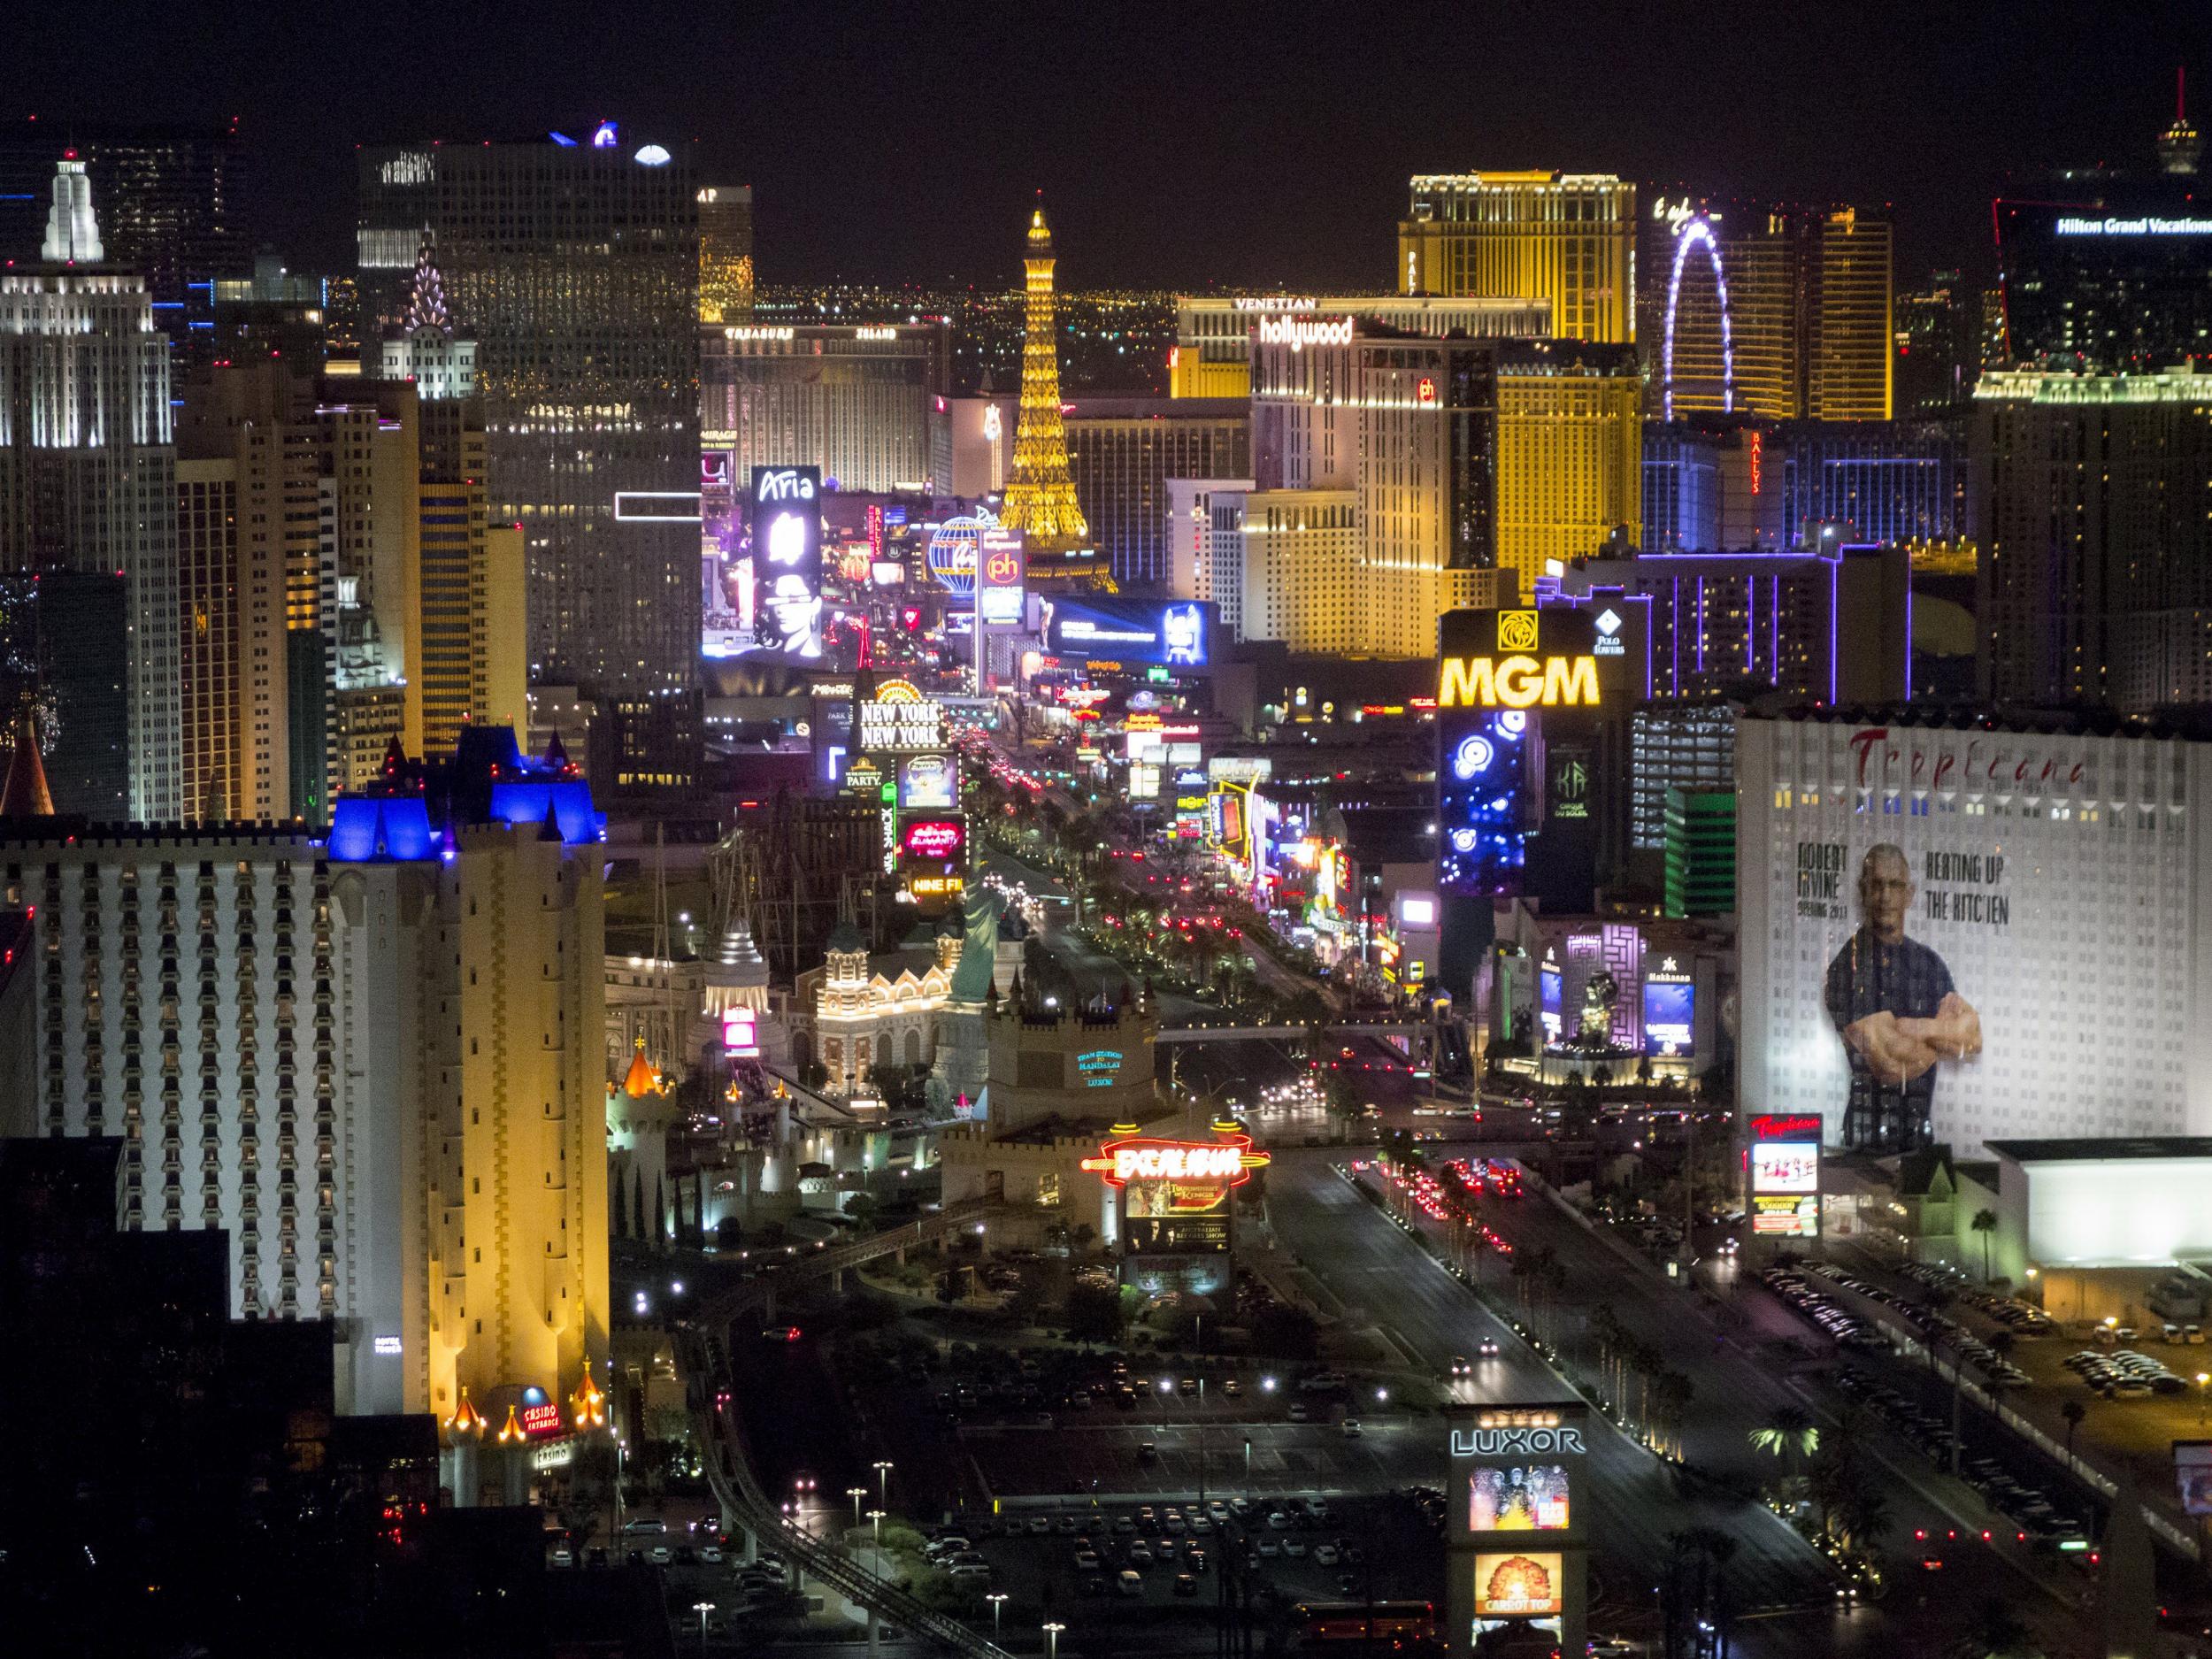 The wedding industry makes over $2bn per year in Las Vegas (AFP/Getty)